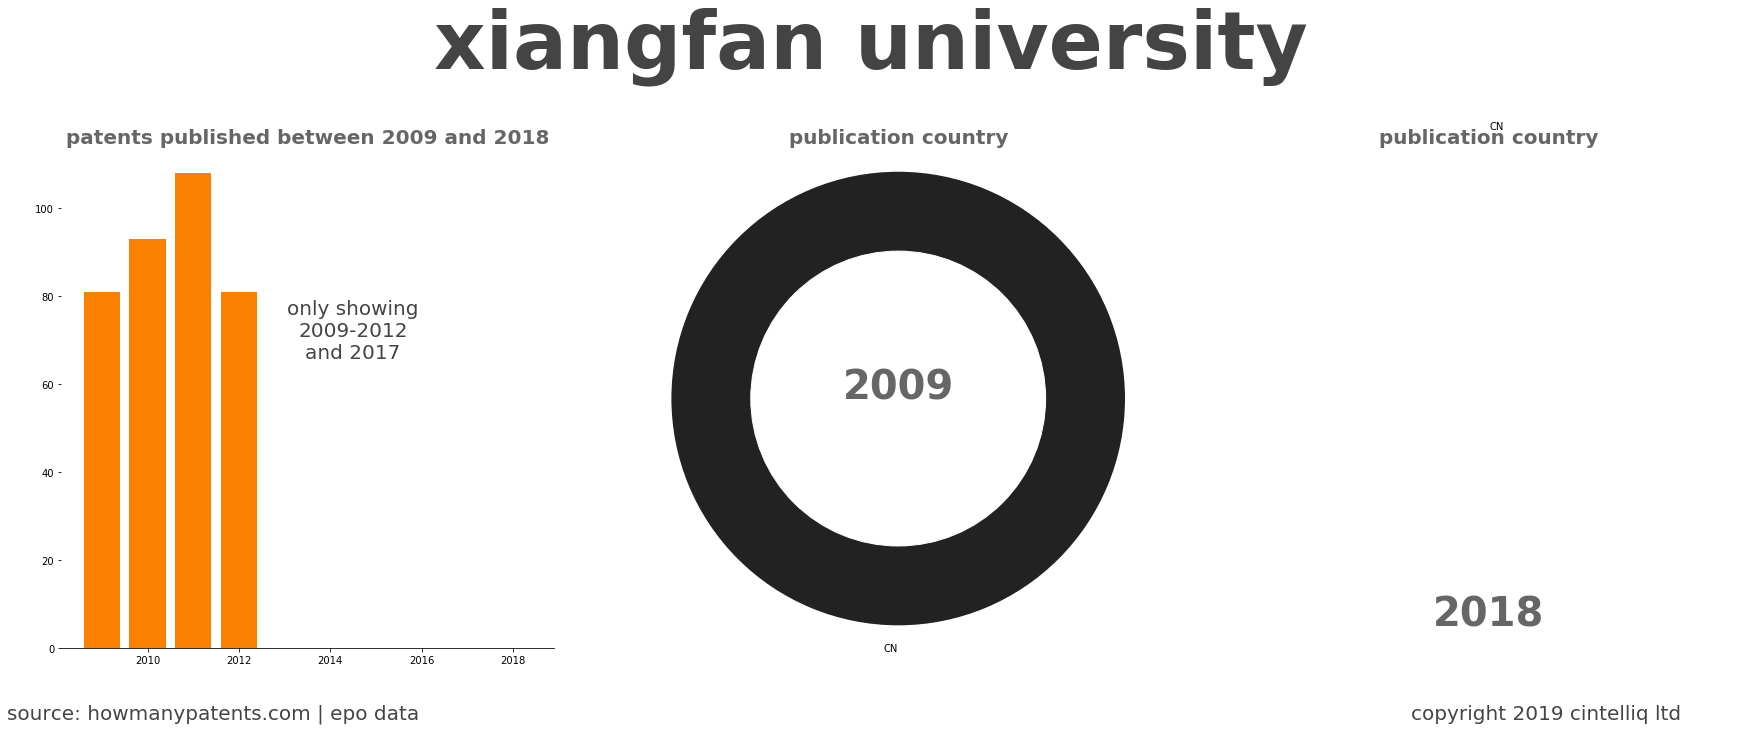 summary of patents for Xiangfan University